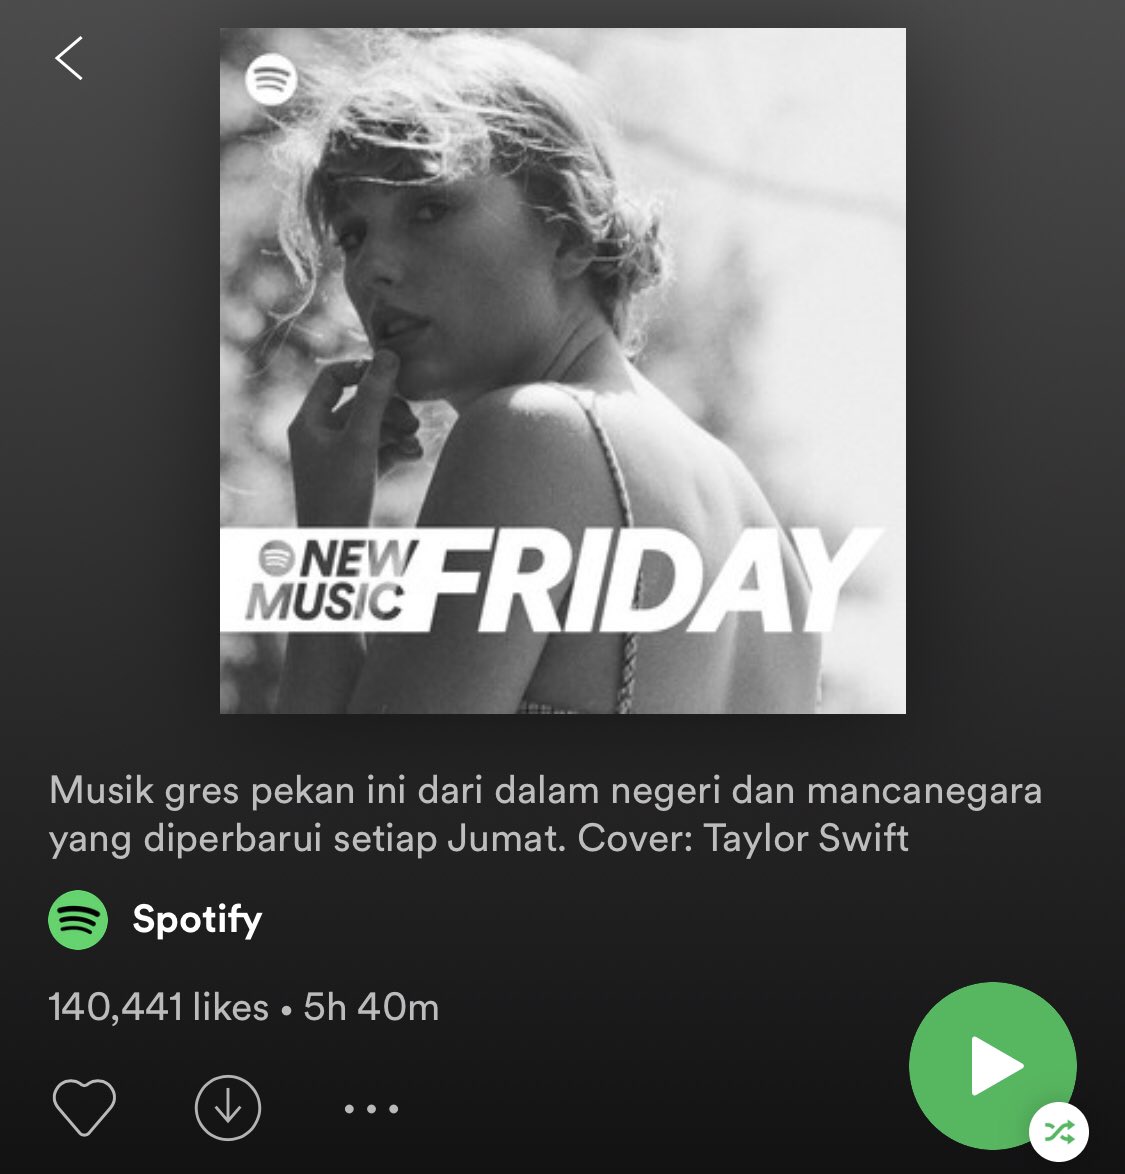 Taylor Swift News Cardigan By Taylorswift13 Was Added To All 46 New Music Friday Playlists On Spotify Landing On 18 Playlist Covers According To Themusicnetwork Keep Streaming The